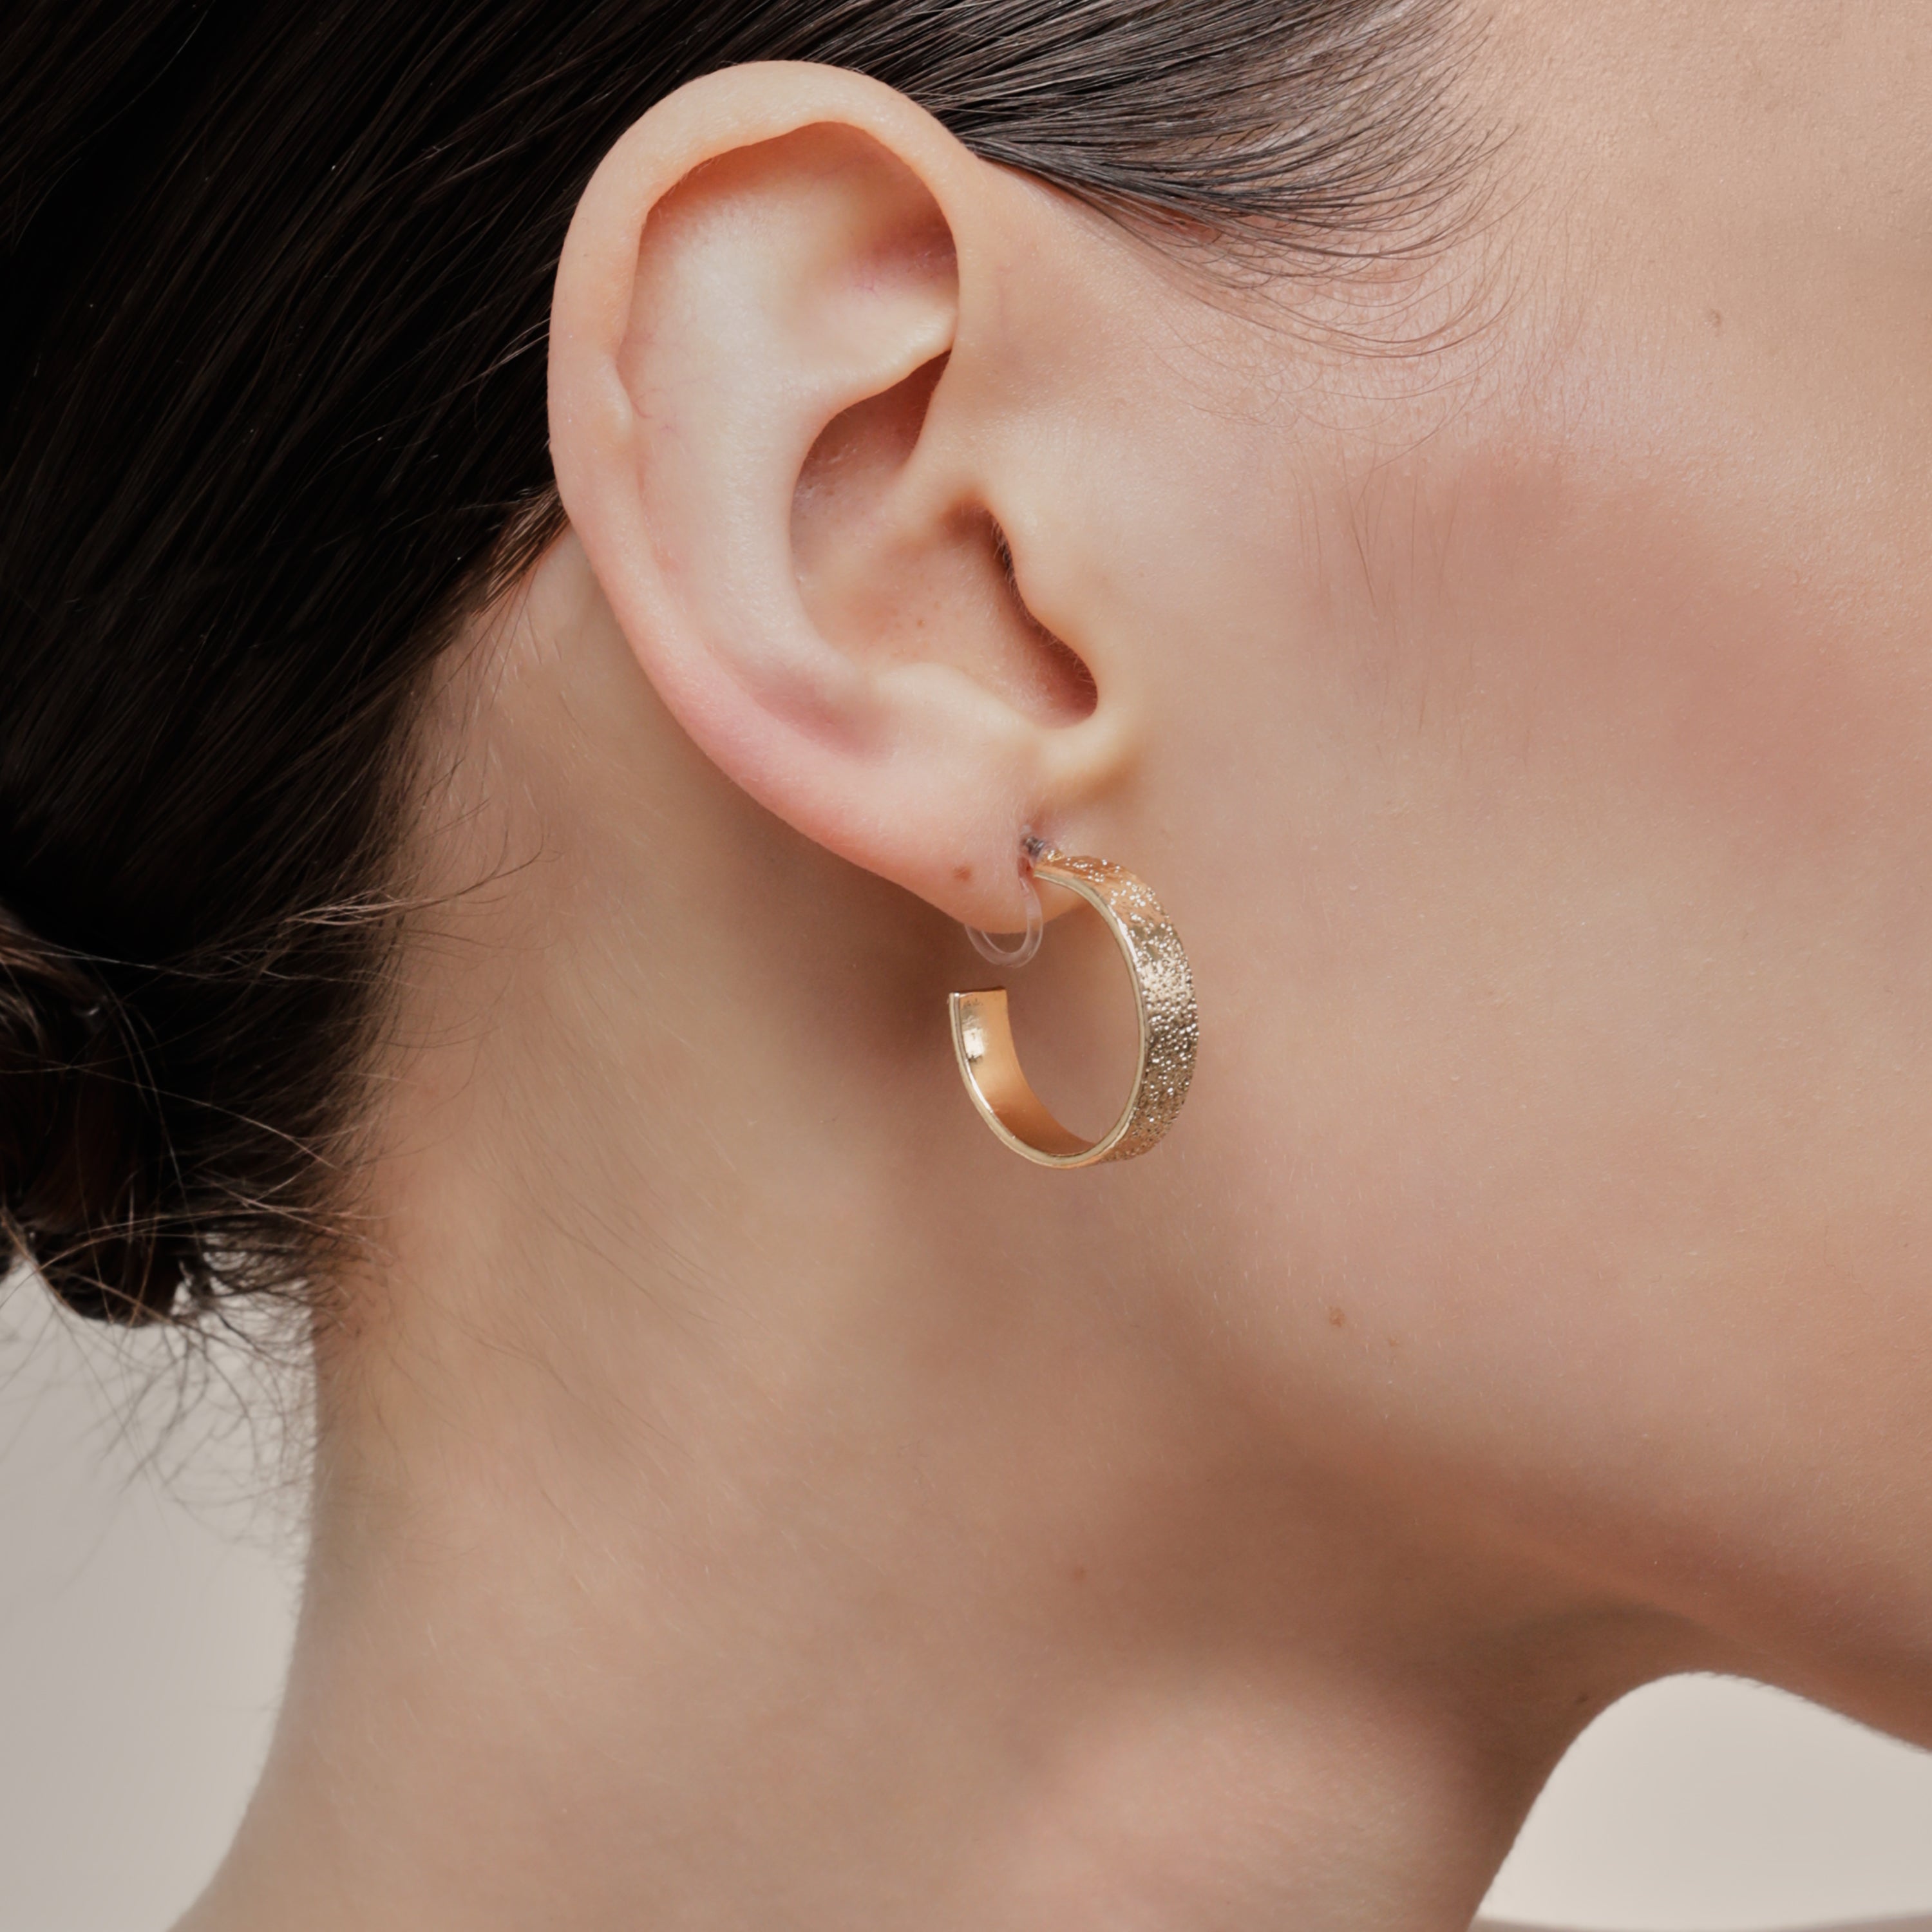 A model wearing the Speckled Hoop Clip On Earrings in Gold offer versatility and comfort for a range of ear sizes and sensitivities. With a medium secure hold, you can confidently wear them for 8-12 hours. Sold as a pair.